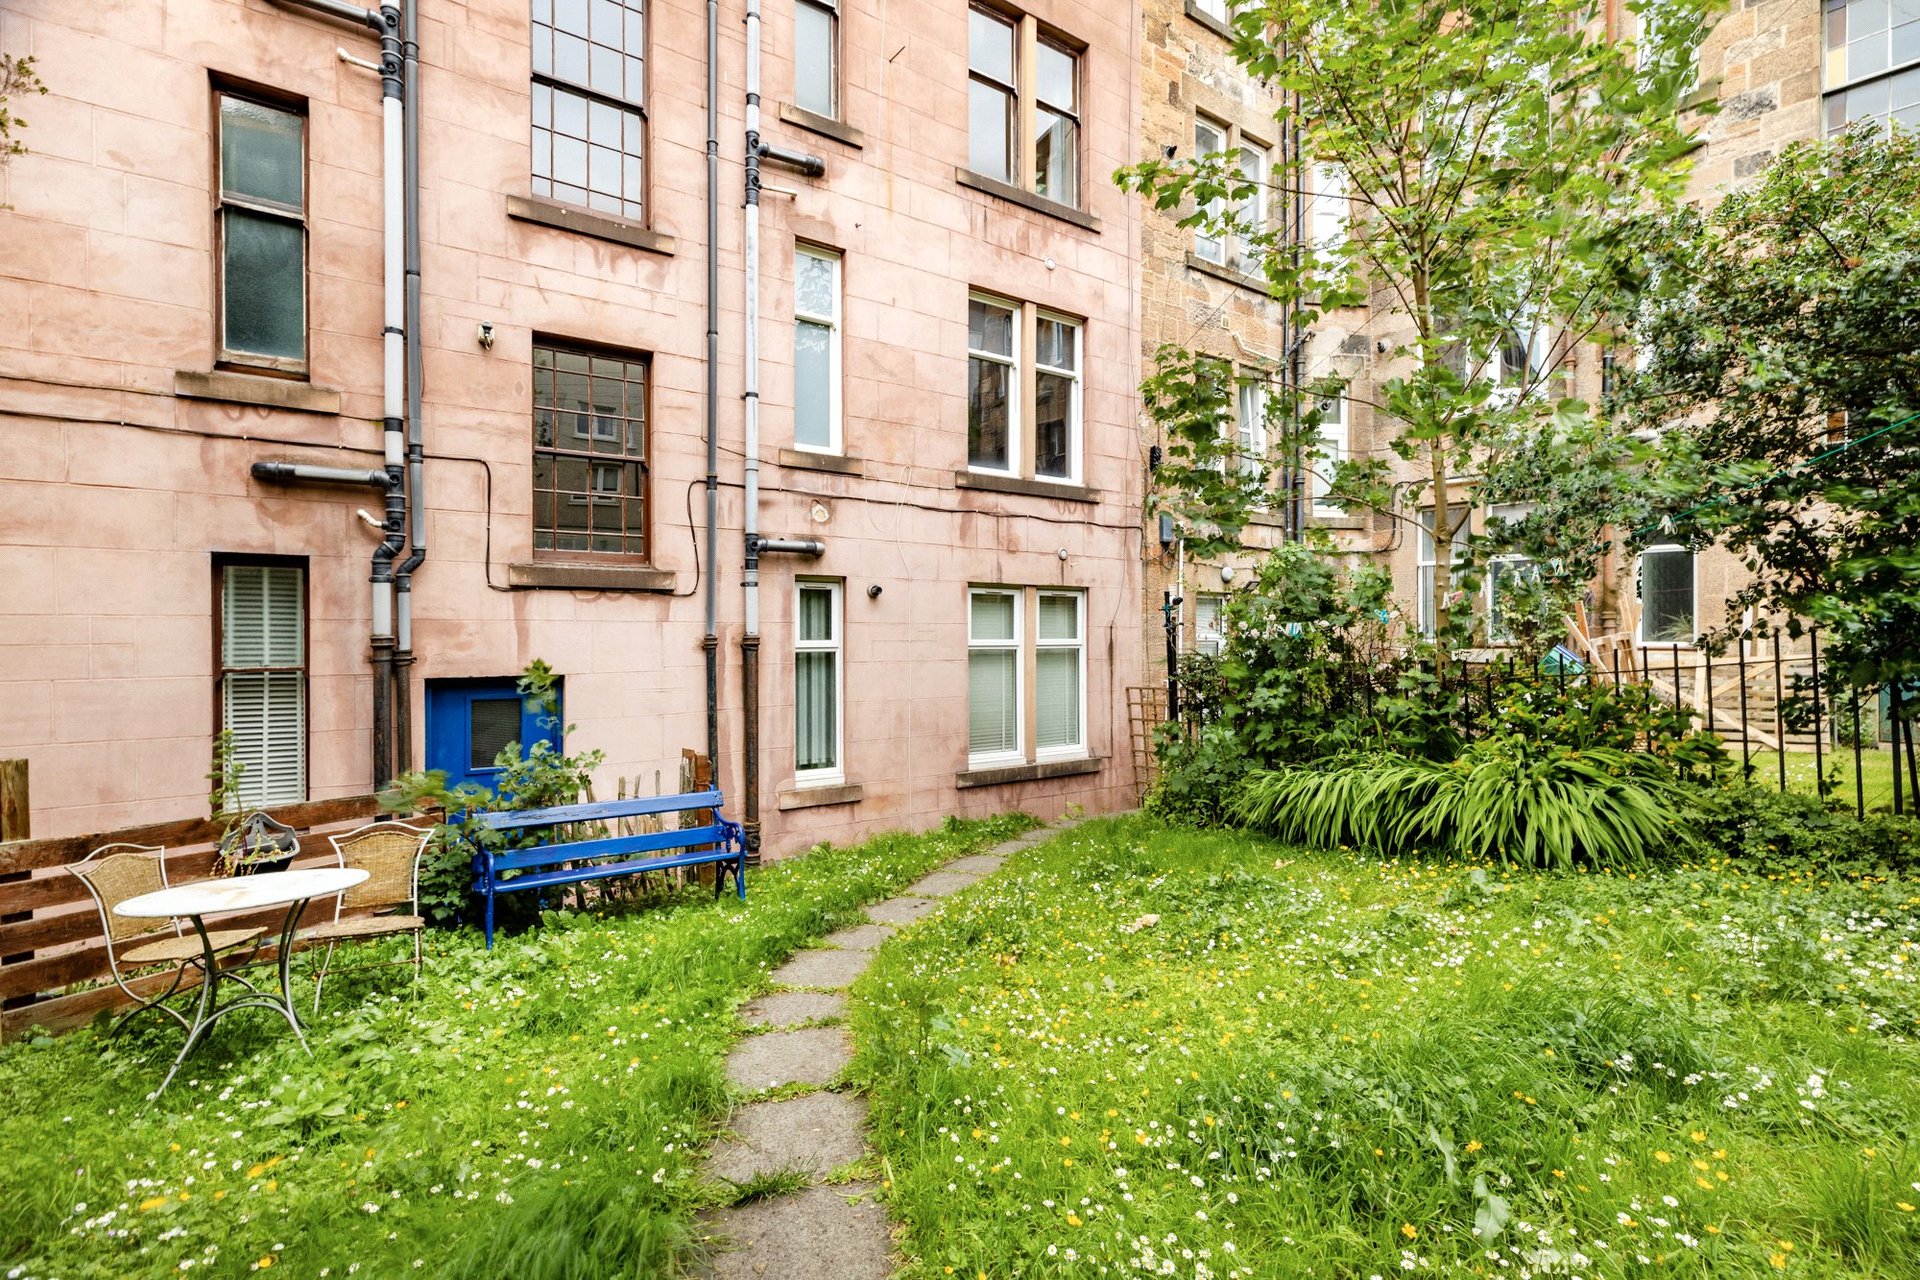 0/1, 203 Crow Road, Broomhill, Glasgow, G11 7PY - Picture #13